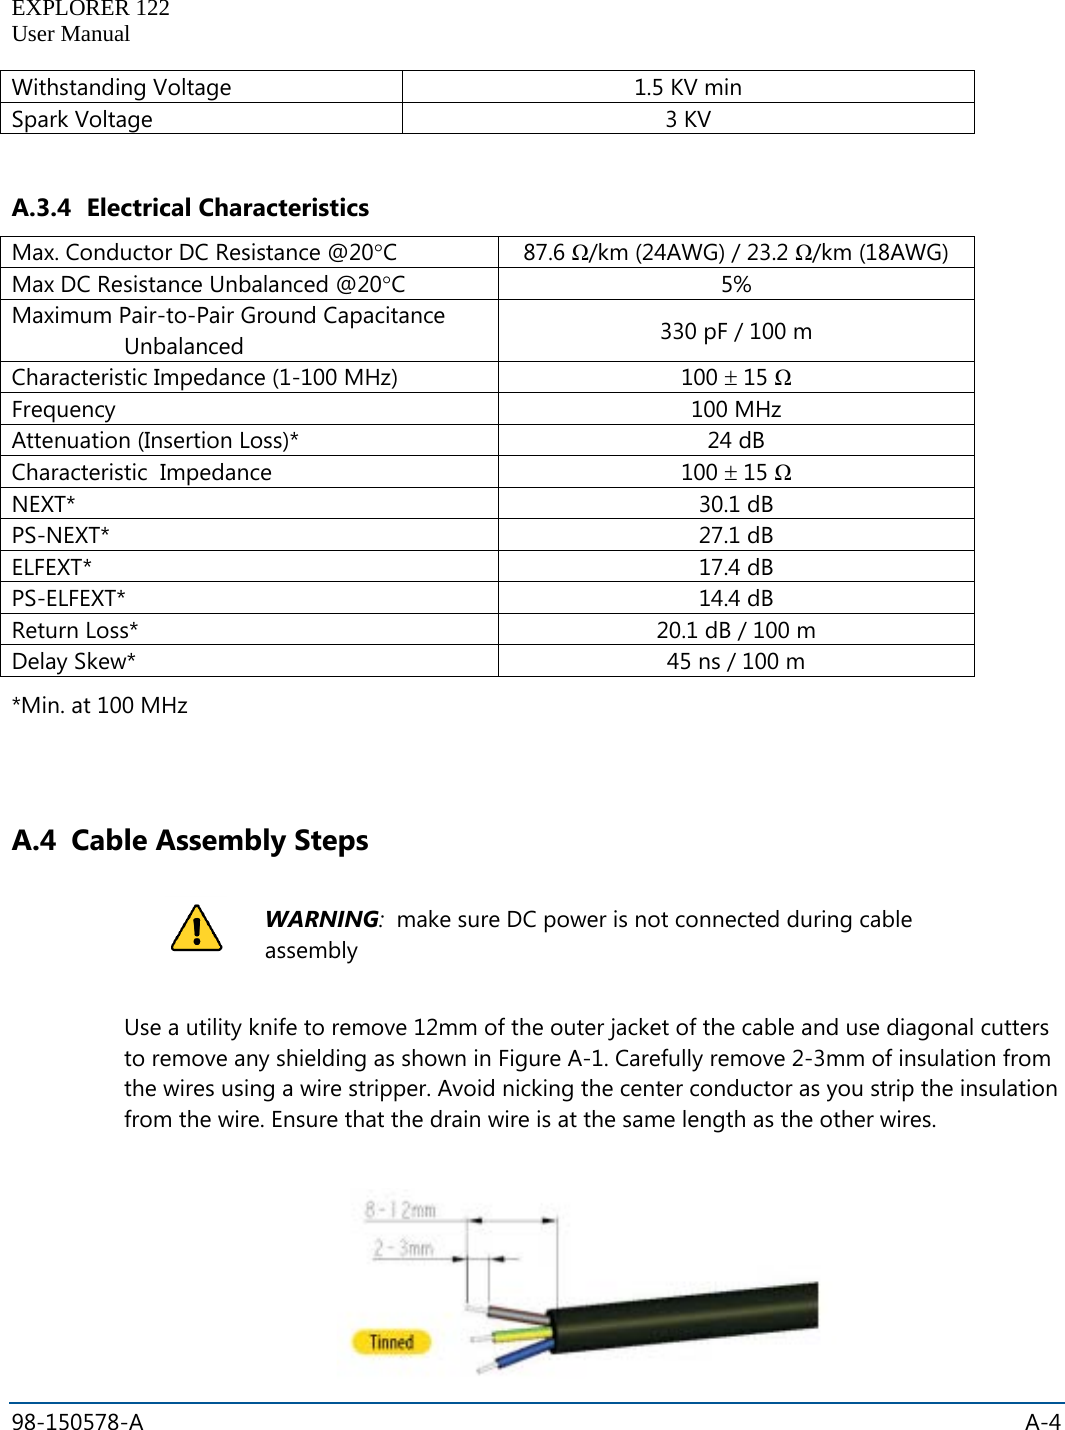   EXPLORER 122  User Manual  98-150578-A    A-4  Withstanding Voltage 1.5 KV min Spark Voltage 3 KV  A.3.4 Electrical Characteristics Max. Conductor DC Resistance @20°C 87.6 Ω/km (24AWG) / 23.2 Ω/km (18AWG) Max DC Resistance Unbalanced @20°C 5% Maximum Pair-to-Pair Ground Capacitance Unbalanced 330 pF / 100 m Characteristic Impedance (1-100 MHz) 100 ± 15 Ω Frequency 100 MHz Attenuation (Insertion Loss)* 24 dB Characteristic  Impedance 100 ± 15 Ω NEXT* 30.1 dB PS-NEXT* 27.1 dB ELFEXT* 17.4 dB PS-ELFEXT* 14.4 dB Return Loss* 20.1 dB / 100 m Delay Skew* 45 ns / 100 m *Min. at 100 MHz   A.4 Cable Assembly Steps    Use a utility knife to remove 12mm of the outer jacket of the cable and use diagonal cutters to remove any shielding as shown in Figure A-1. Carefully remove 2-3mm of insulation from the wires using a wire stripper. Avoid nicking the center conductor as you strip the insulation from the wire. Ensure that the drain wire is at the same length as the other wires.     WARNING:  make sure DC power is not connected during cable assembly 